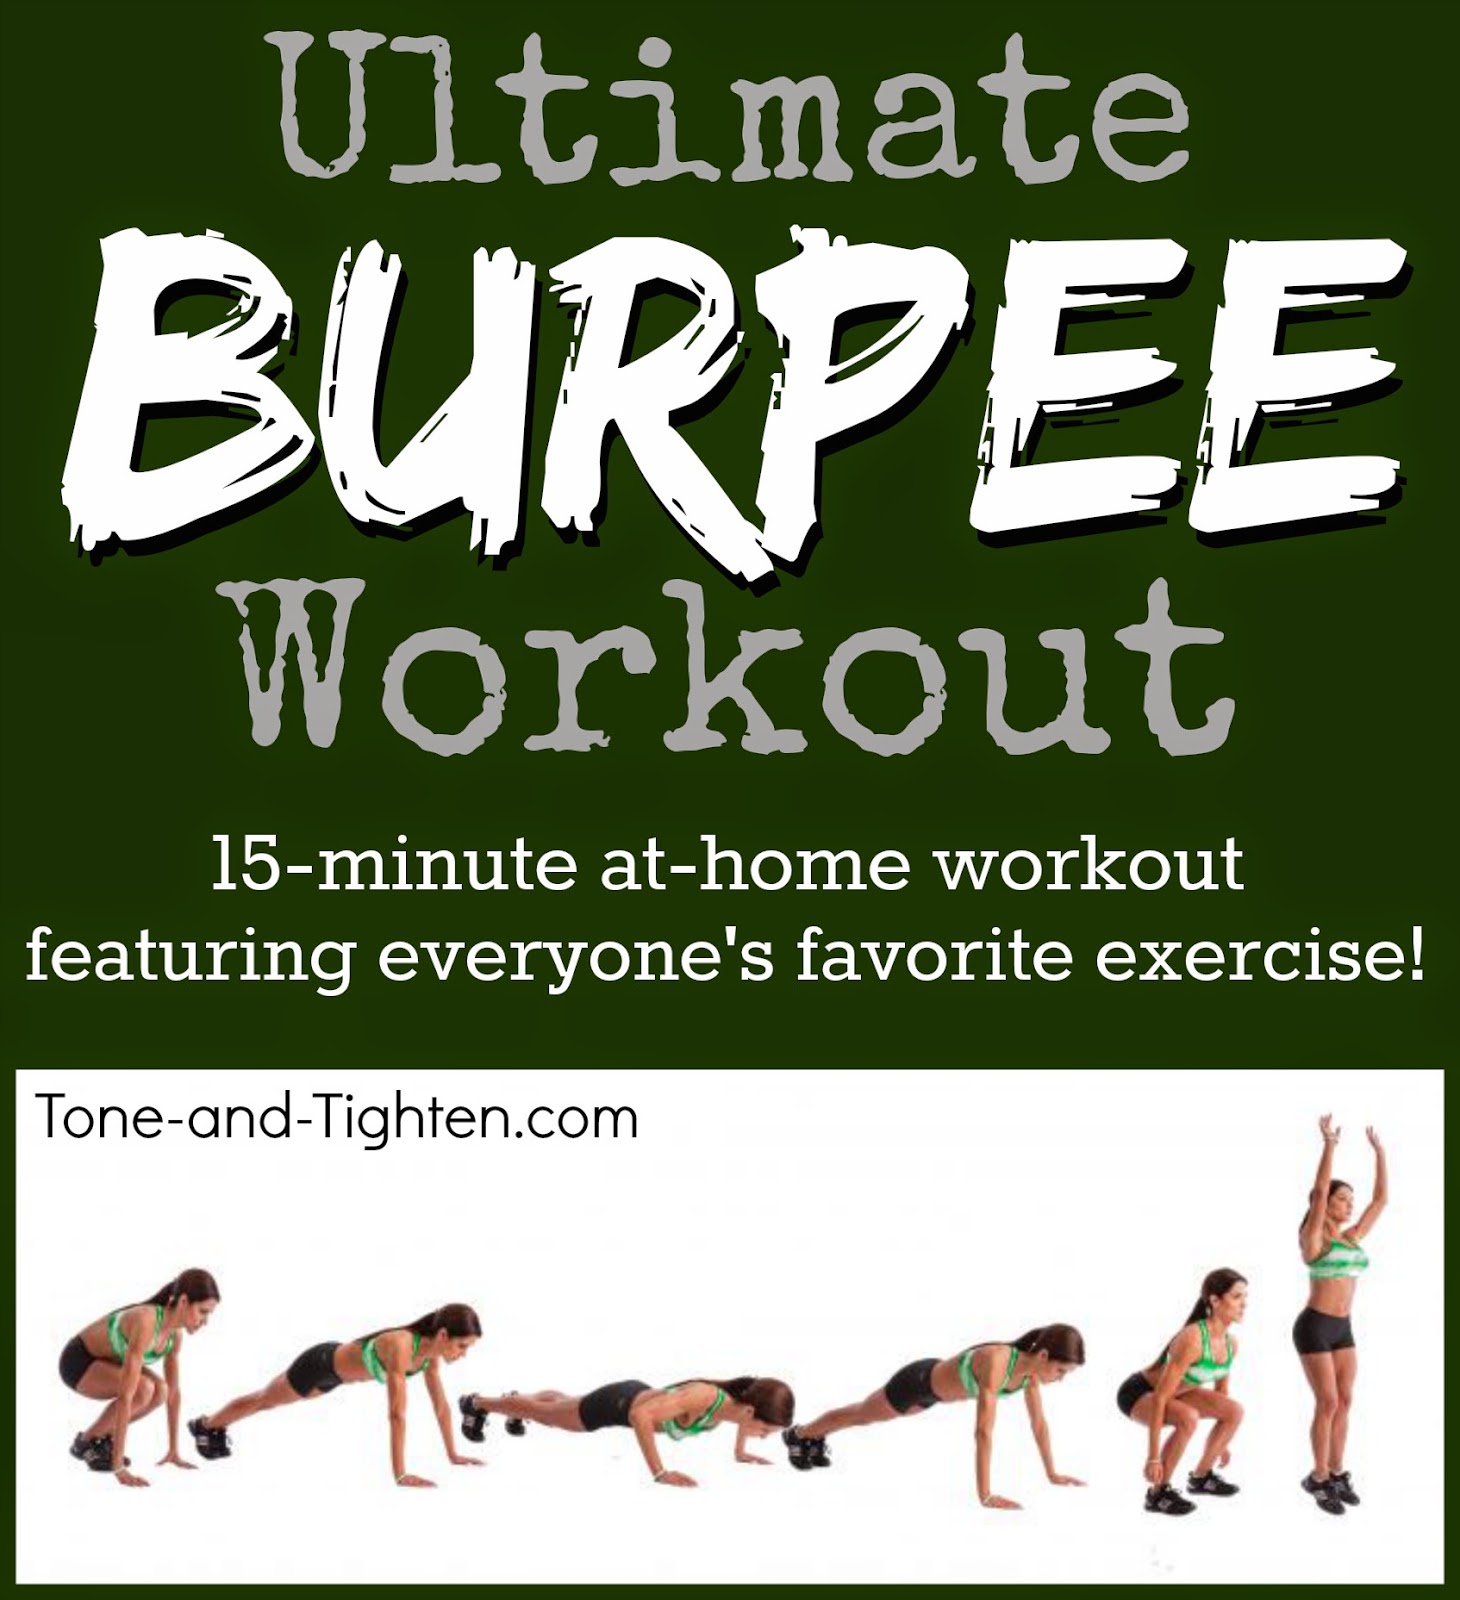 Total Burpee Workout – Build a better burpee with this amazing 15 minute workout! – How to do a burpee